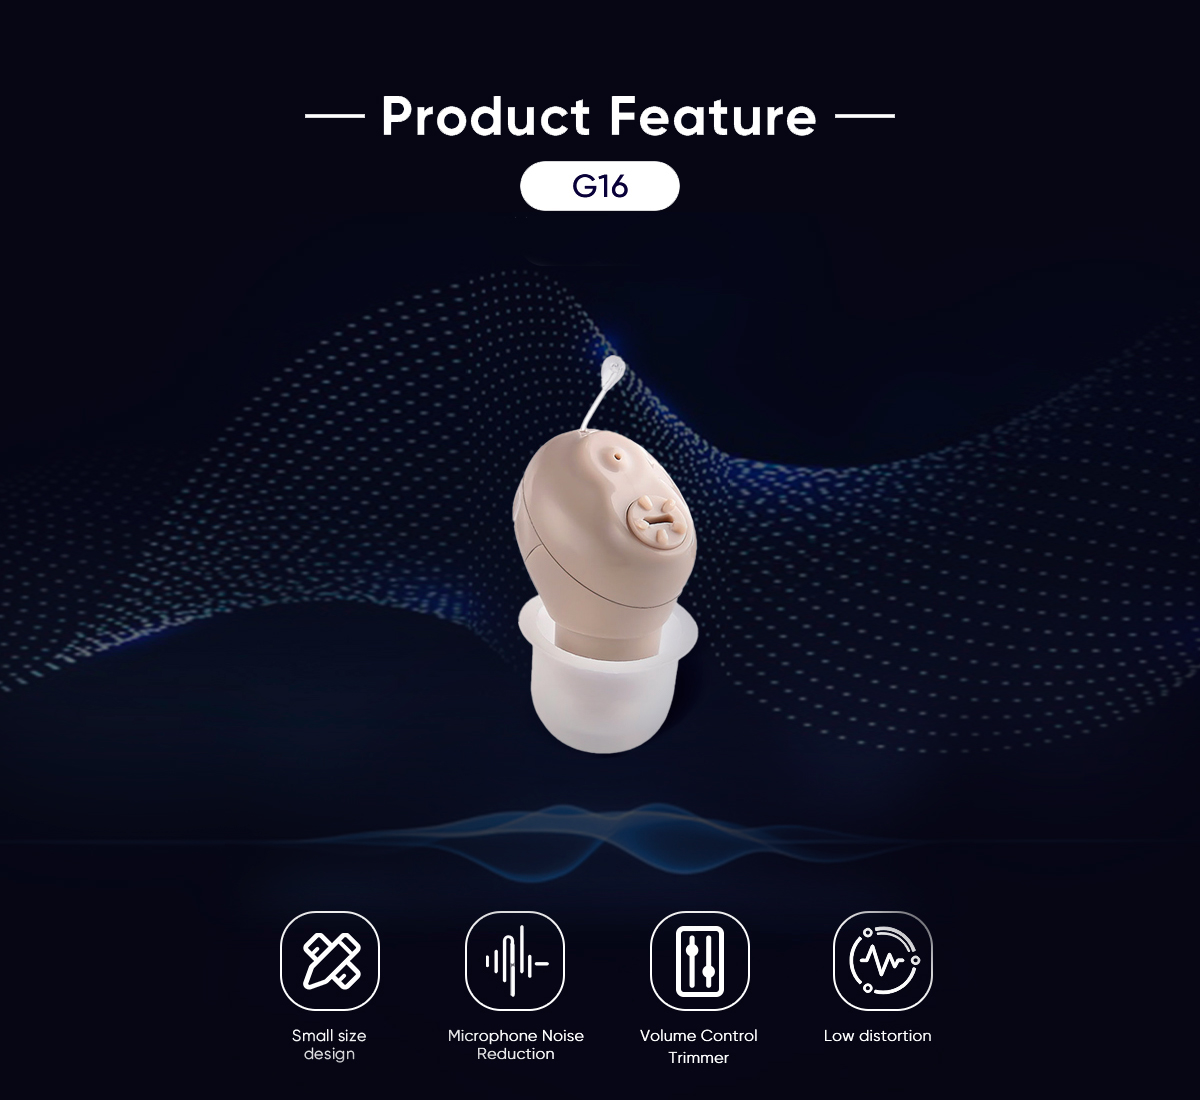 ear-hearing-aids-for-hearing-loss--G16-1